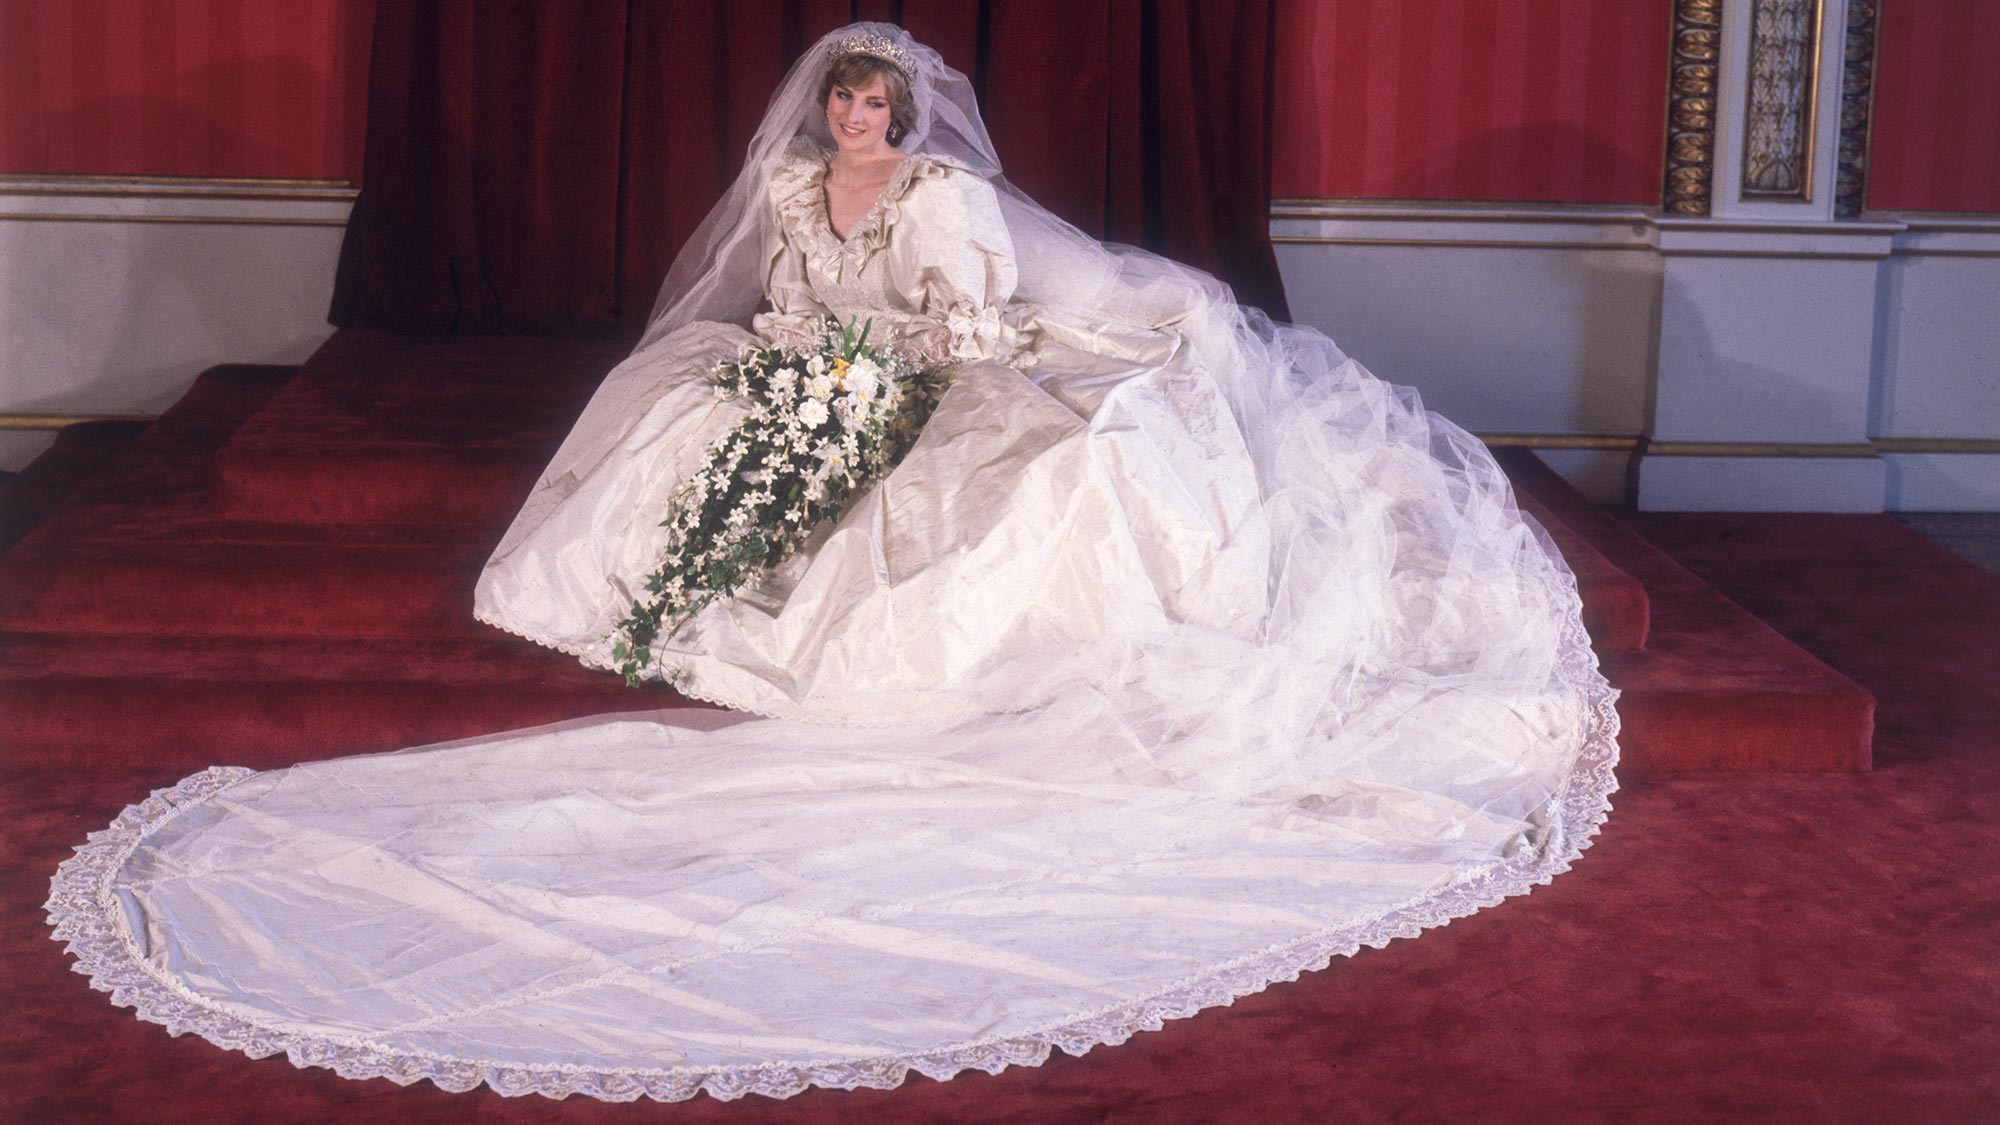 This is we might never officially see Princess Diana’s wedding dress again